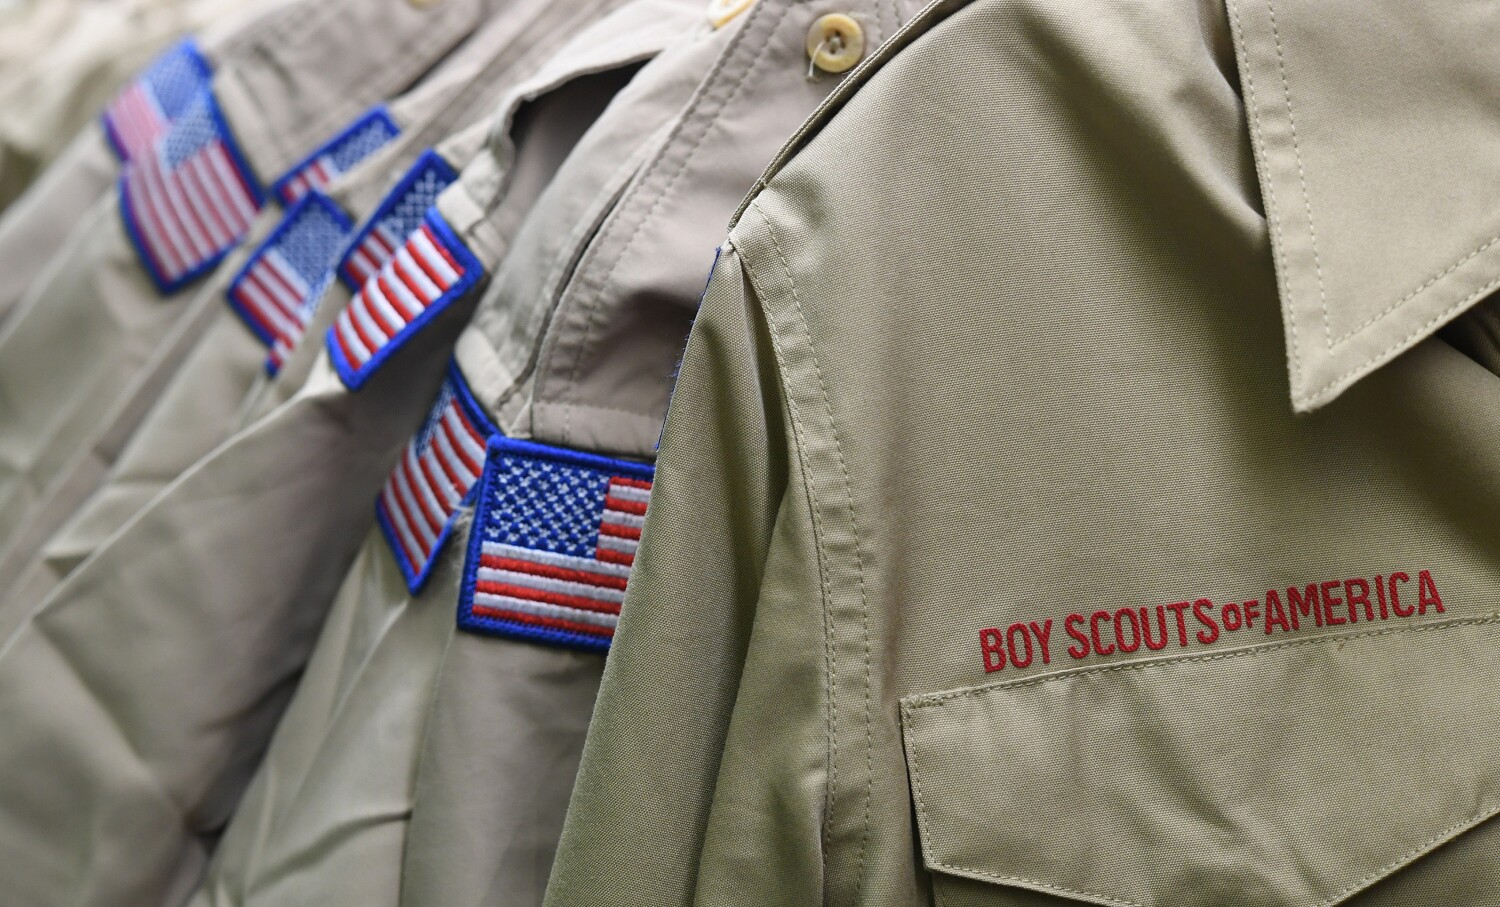 Boy Scouts reach bankruptcy deal with attorneys for sexual abuse survivors